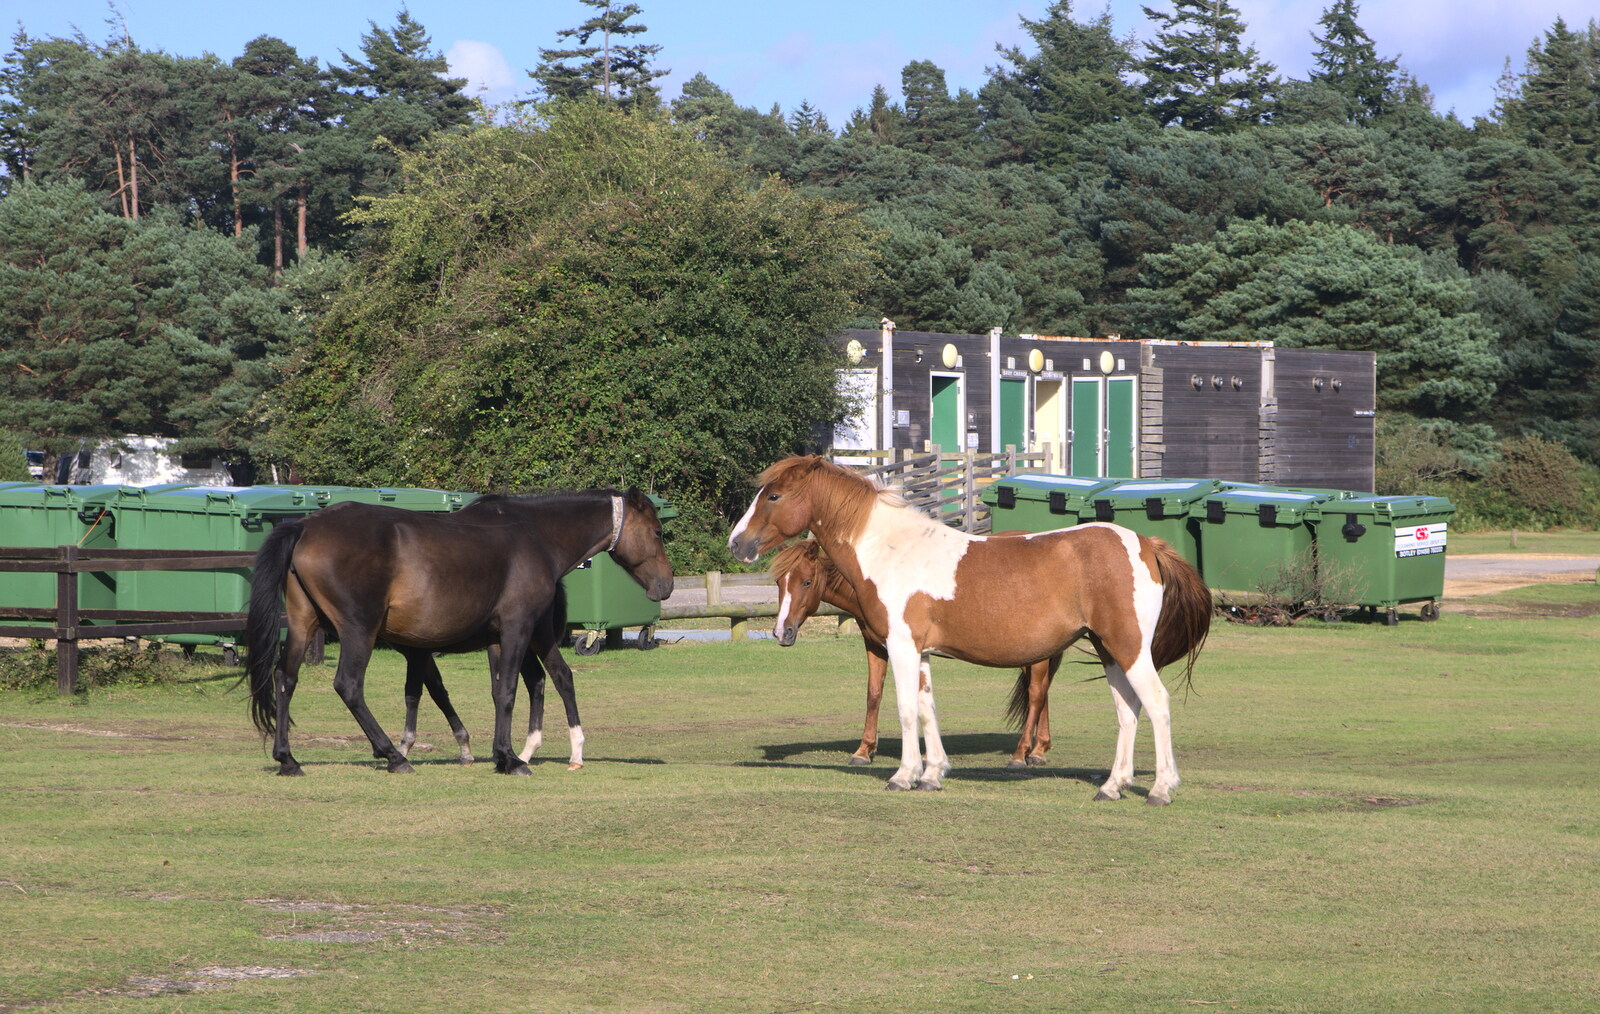 A gathering of ponies from Camping at Roundhills, Brockenhurst, New Forest, Hampshire - 29th August 2015